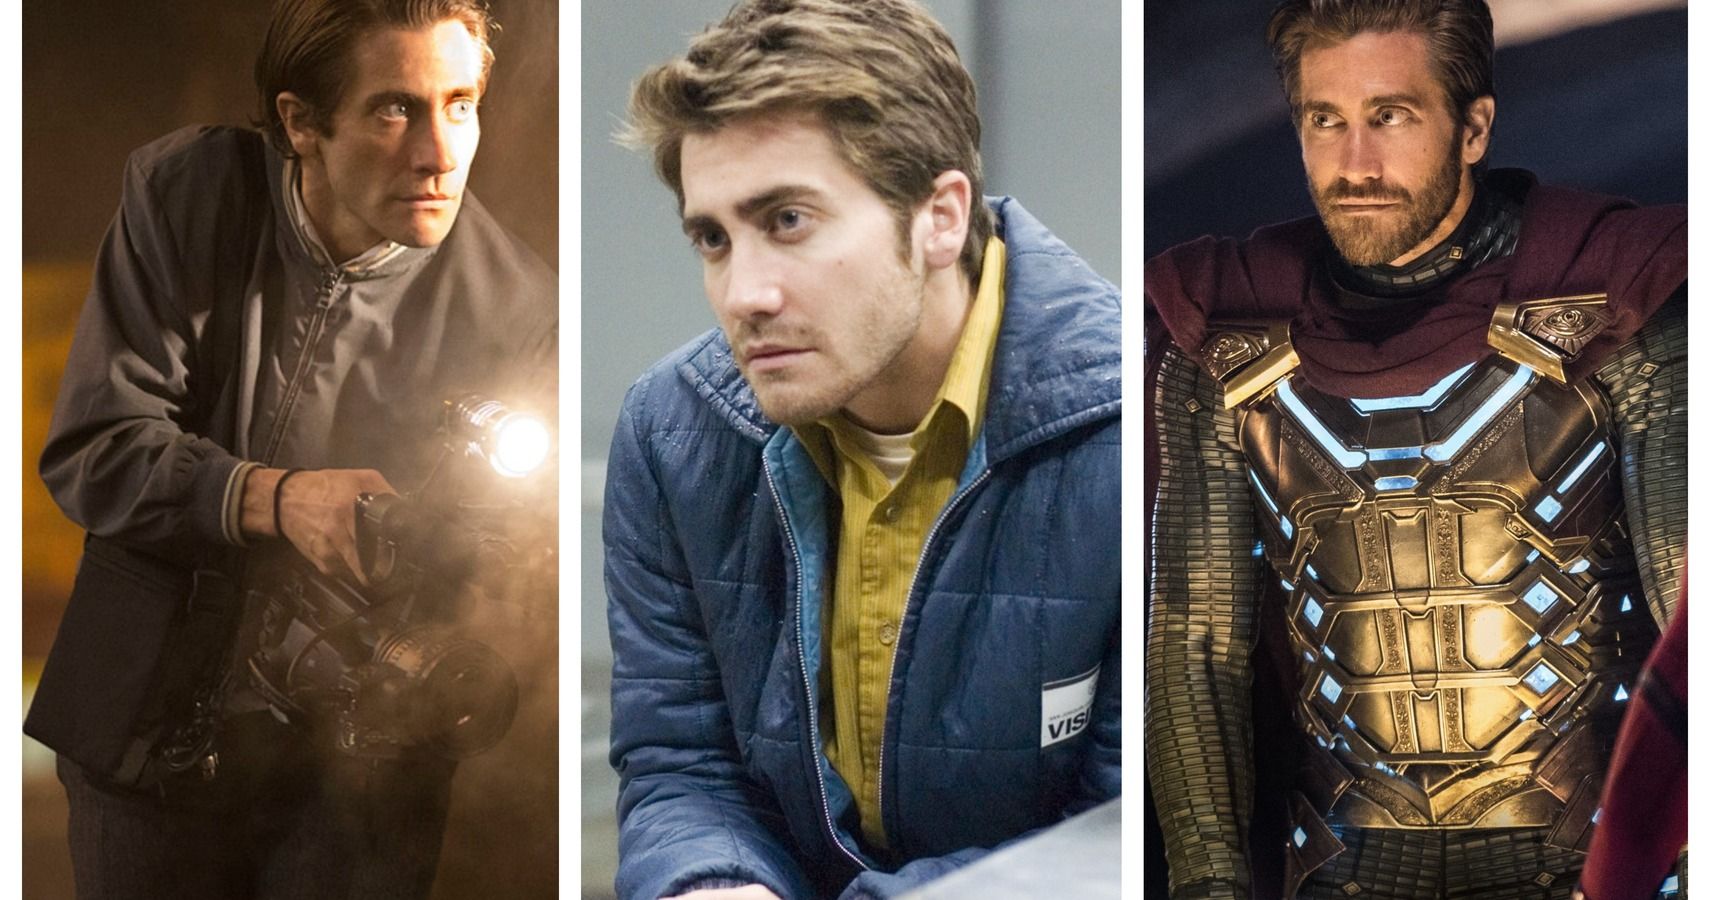 Jake Gyllenhaal’s 10 most iconic roles, ranging from darkest to happiest